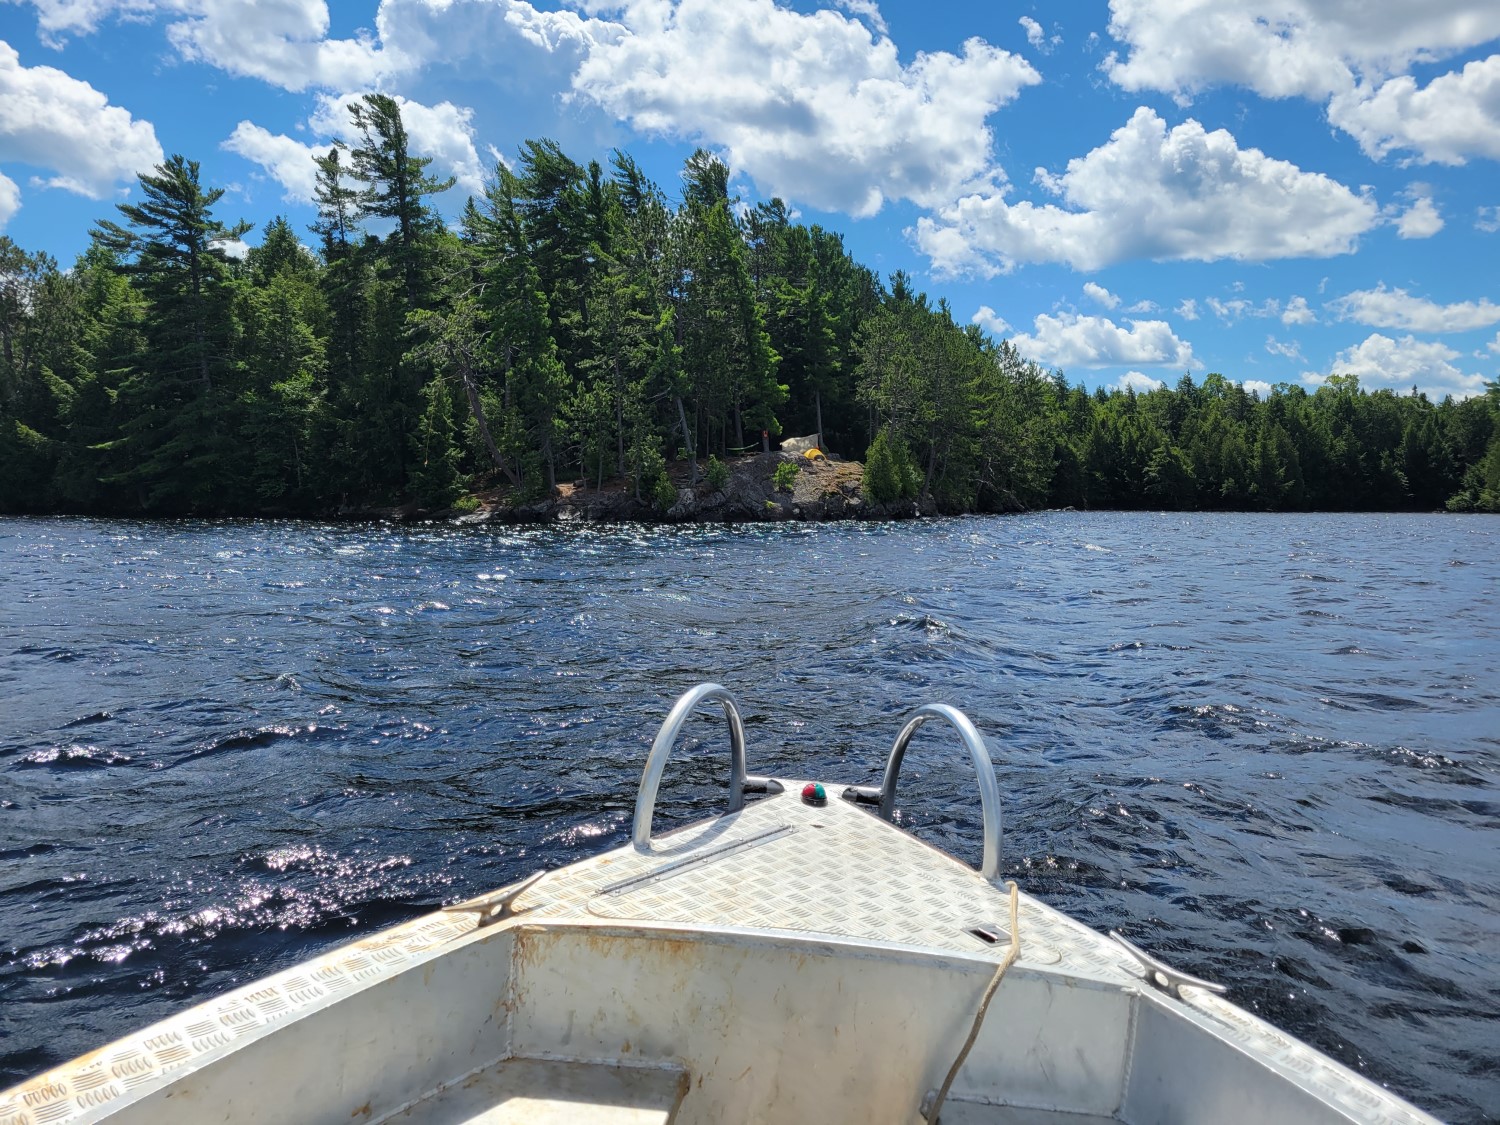 View from the front of a small metal boat facing toward a small, tree-covered island. In the clearing on the island, there is a small yellow tent.